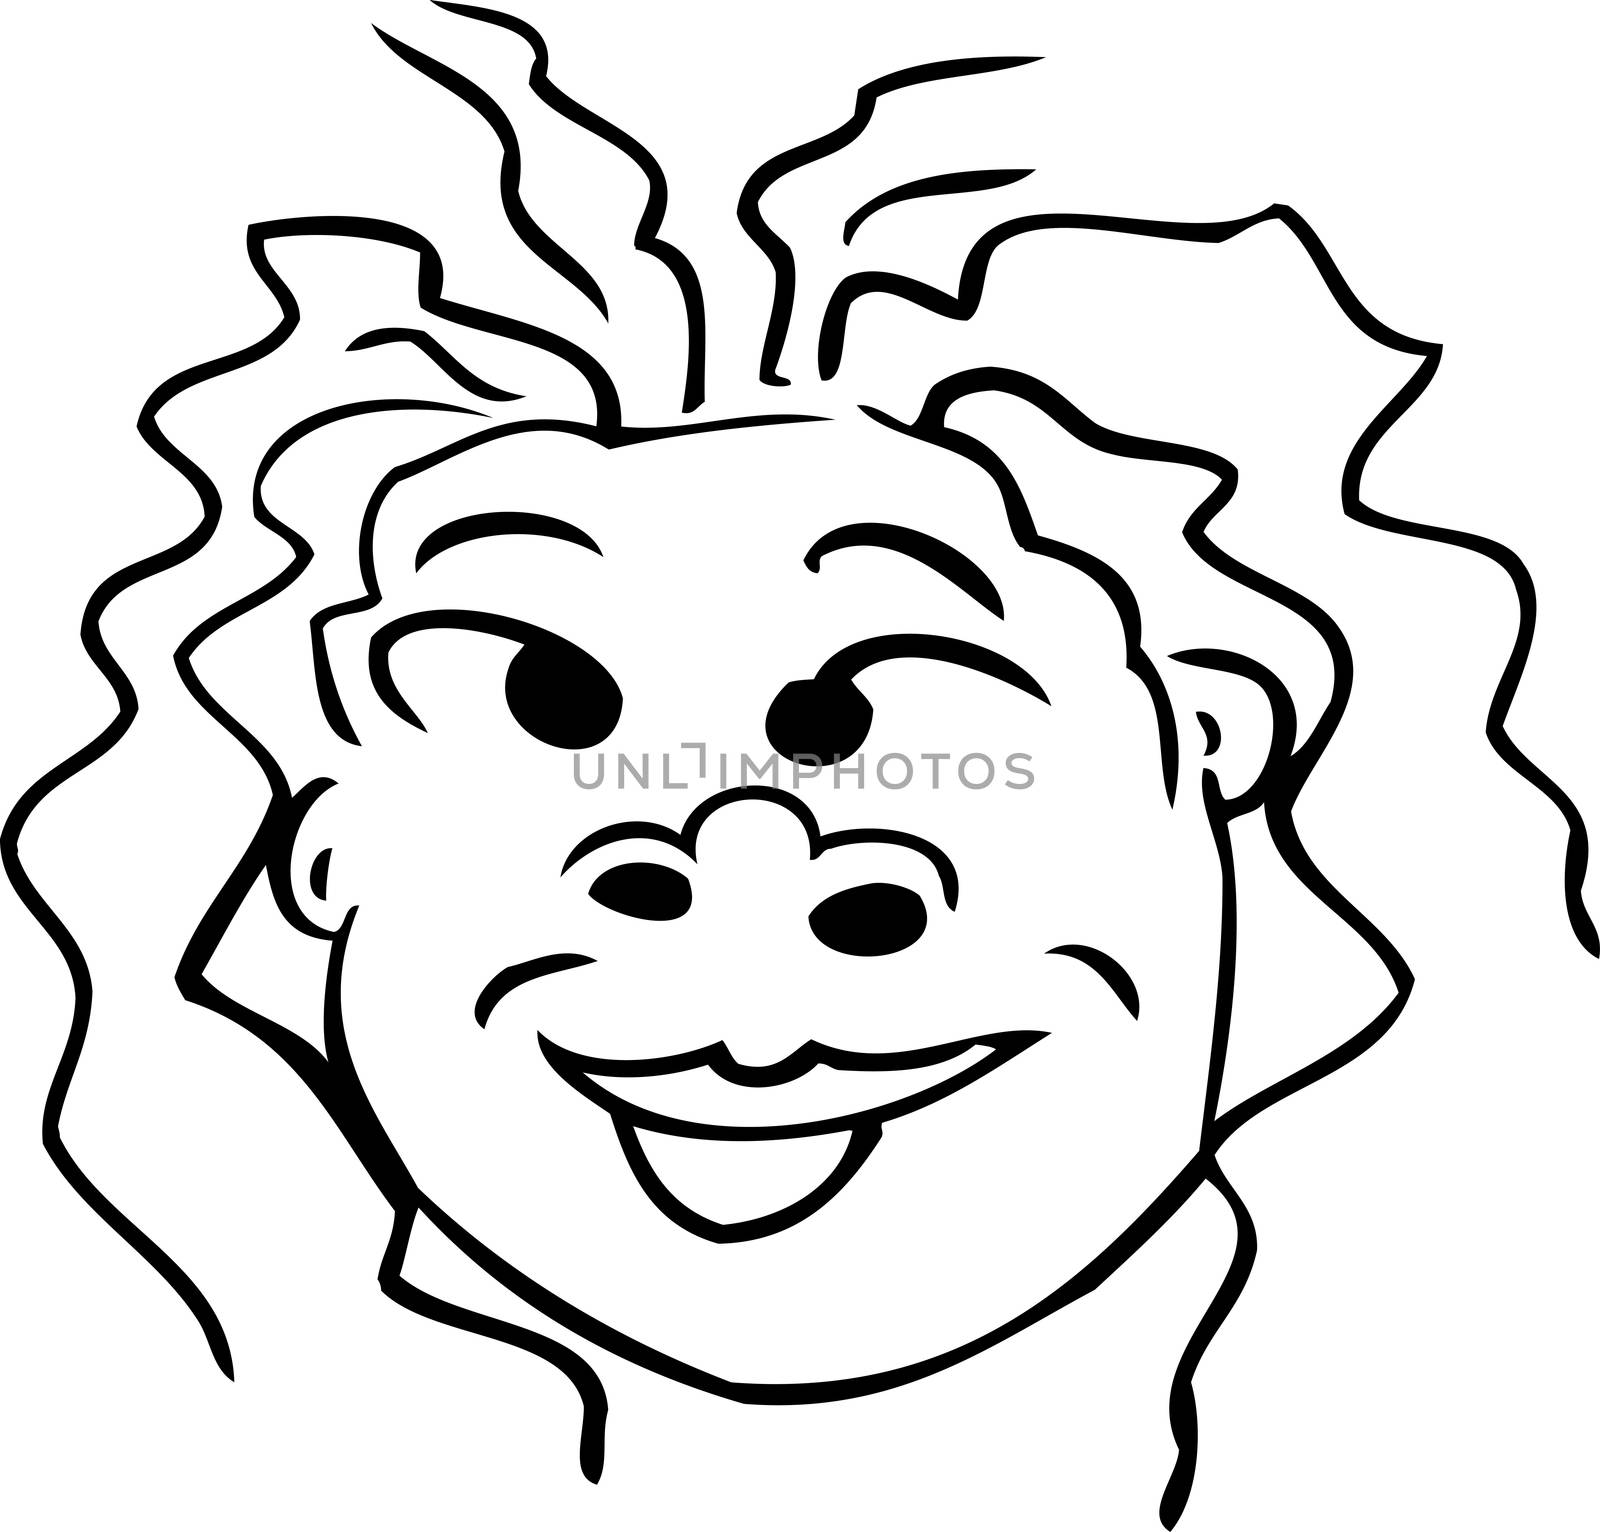 Outlined Smiling Woman Icon by TheBlackRhino